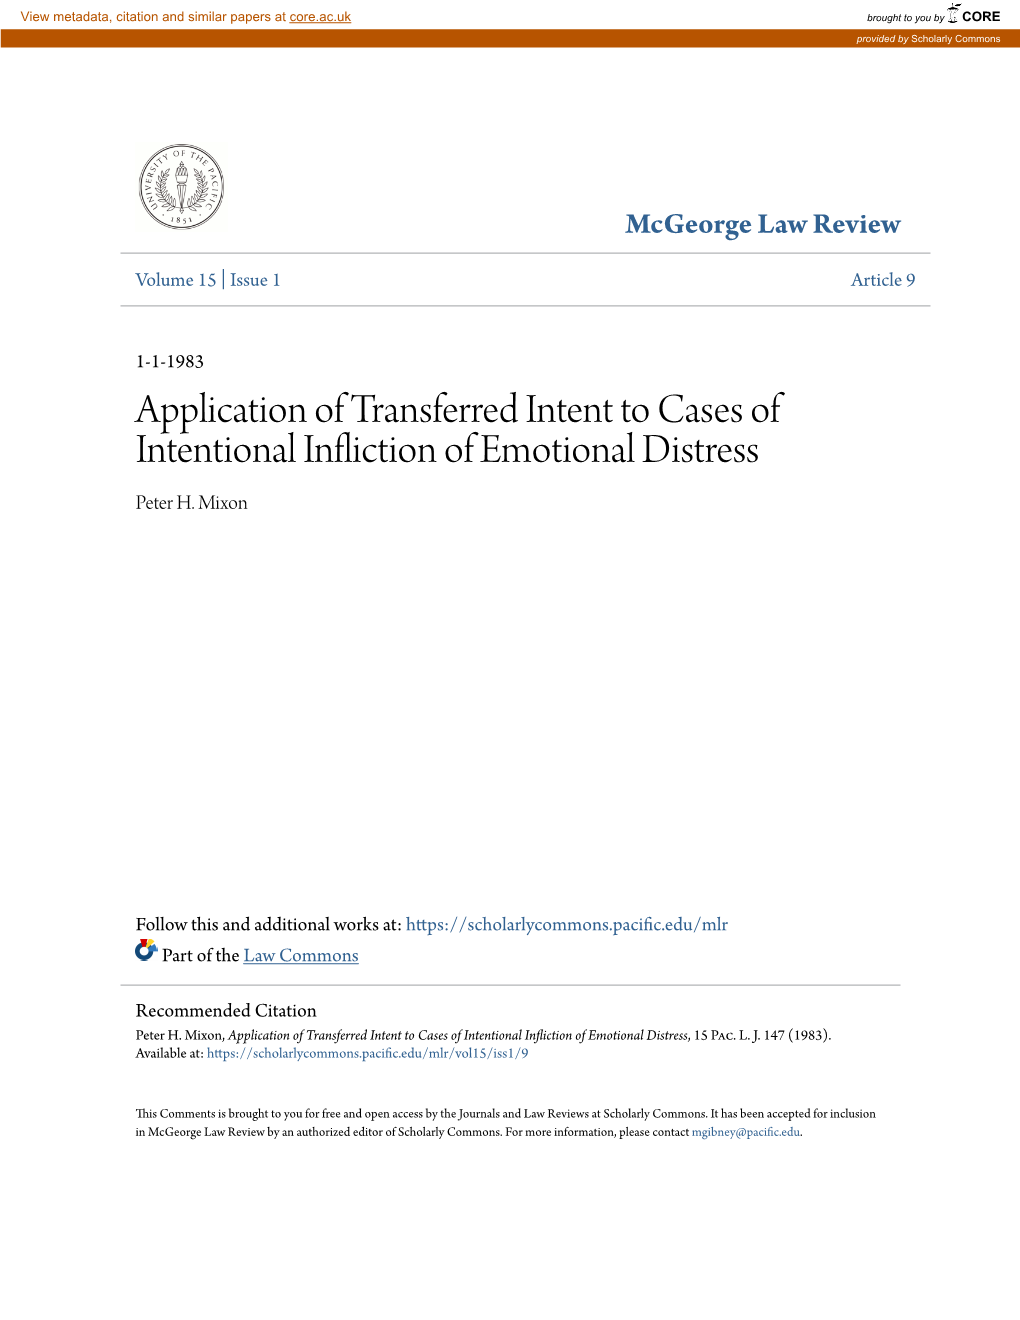 Application of Transferred Intent to Cases of Intentional Infliction of Emotional Distress Peter H